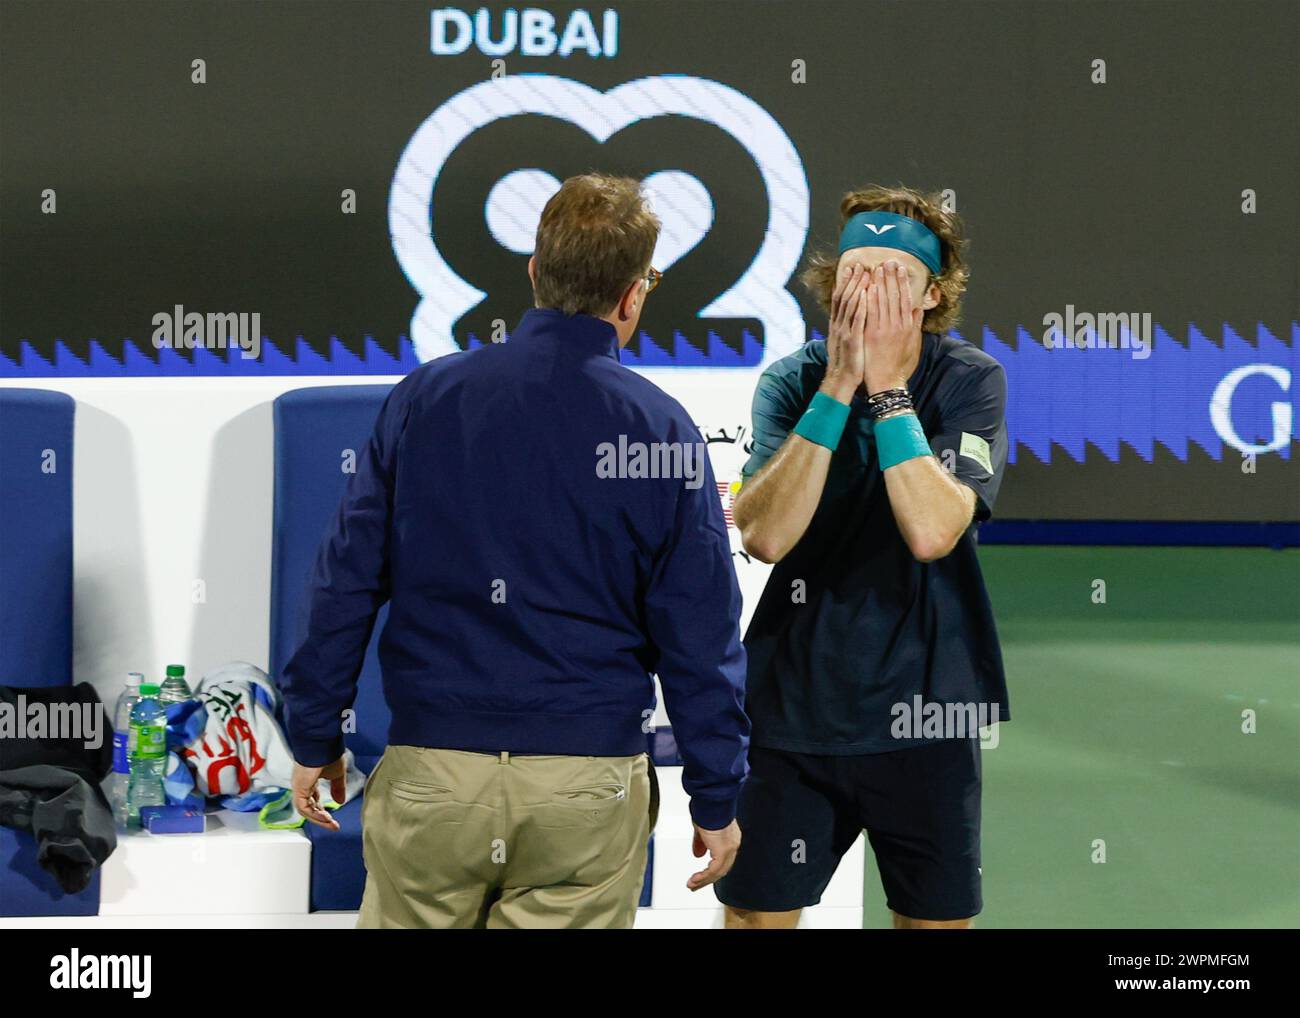 Andrey Rublev being informed by the ATP supervisor that he has been defaulted for using abusive language towards a linesperson at the Dubai Duty Free Stock Photo